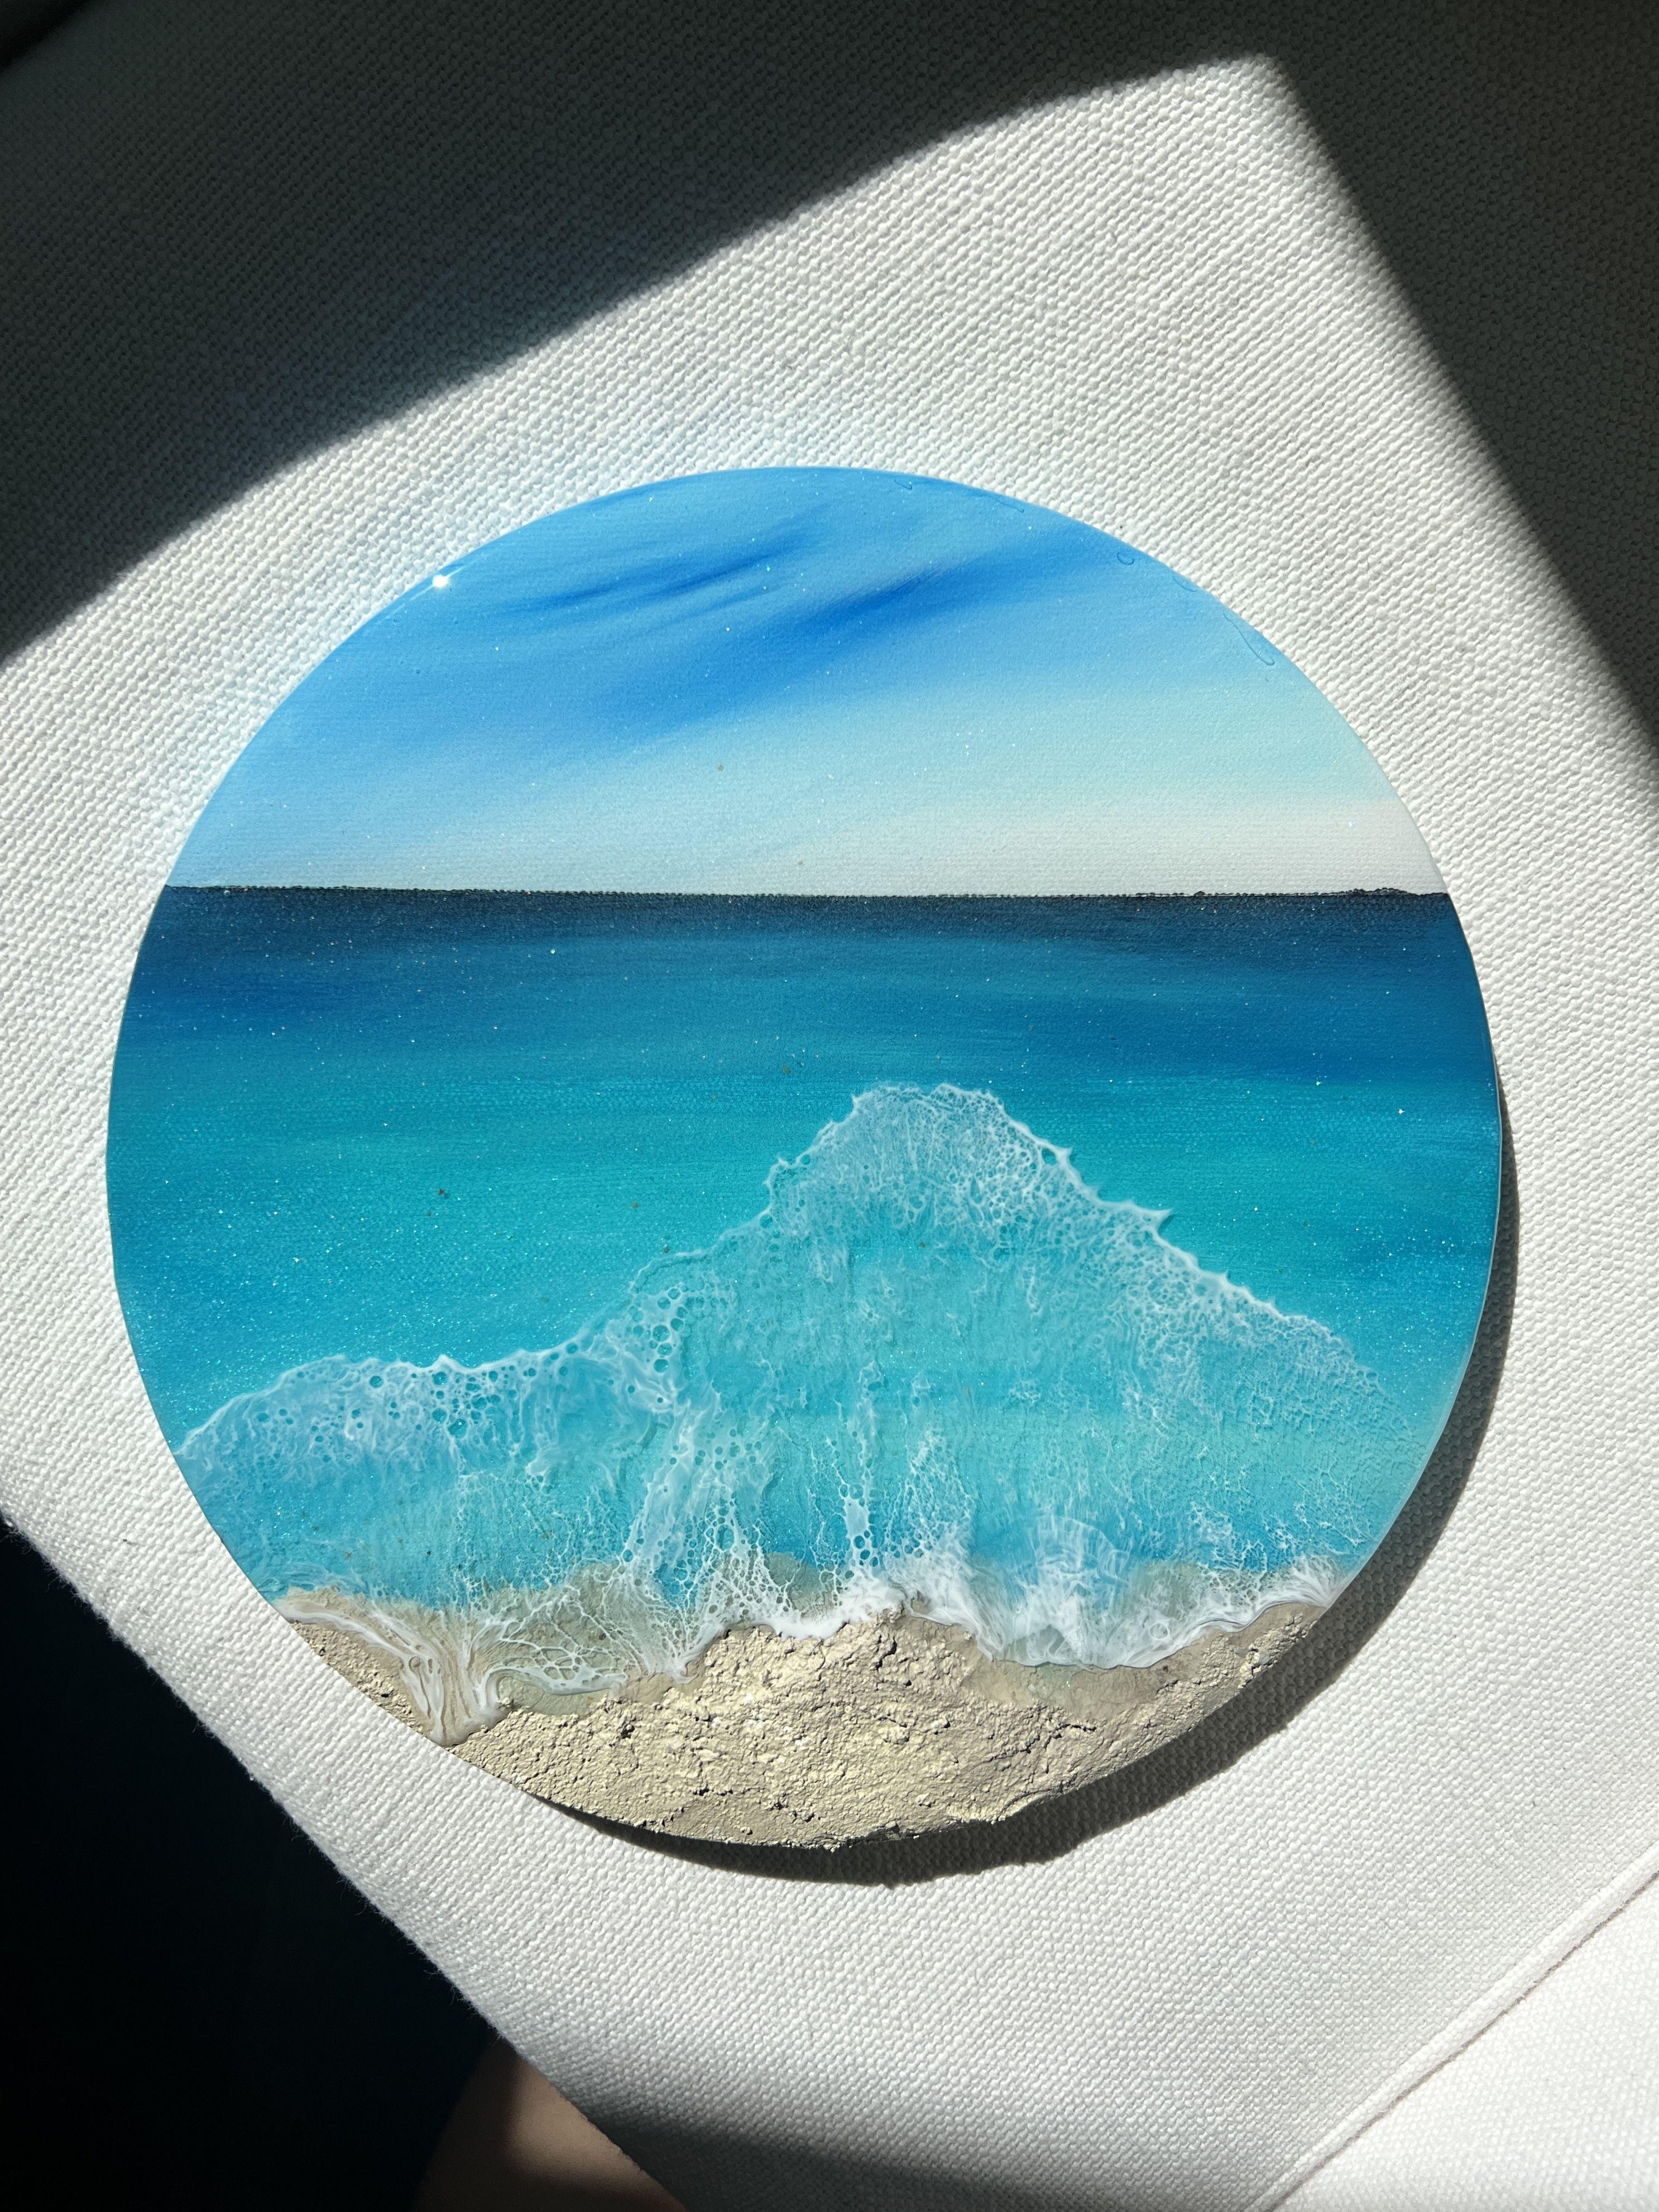 Seascape Painting     Inspired by The Turks And Caicos ocean colors  Different shades of blue tones, turquoise, teal, aqua, beige and white  This painting does not need to be framed, the painted image extends over the sides, it is wired, signed,